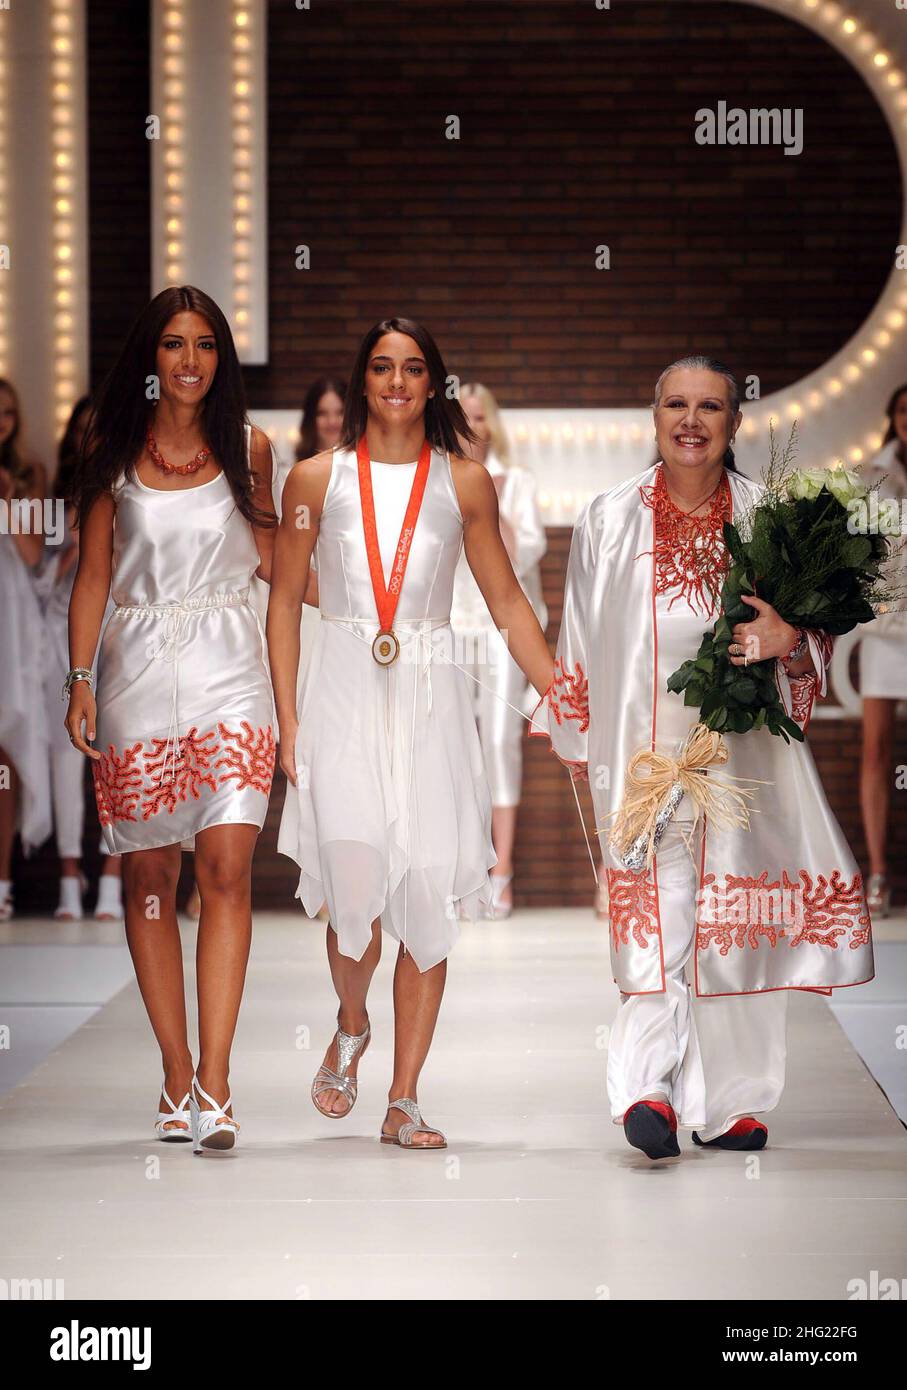 Italian judo lightweight Olympic gold medalist Giulia Quintavalle (center) with designer Laura Biagiotti (right) and her daughter Lavinia at the end of the Laura Biagiotti show during Milan Fashion Week. Stock Photo